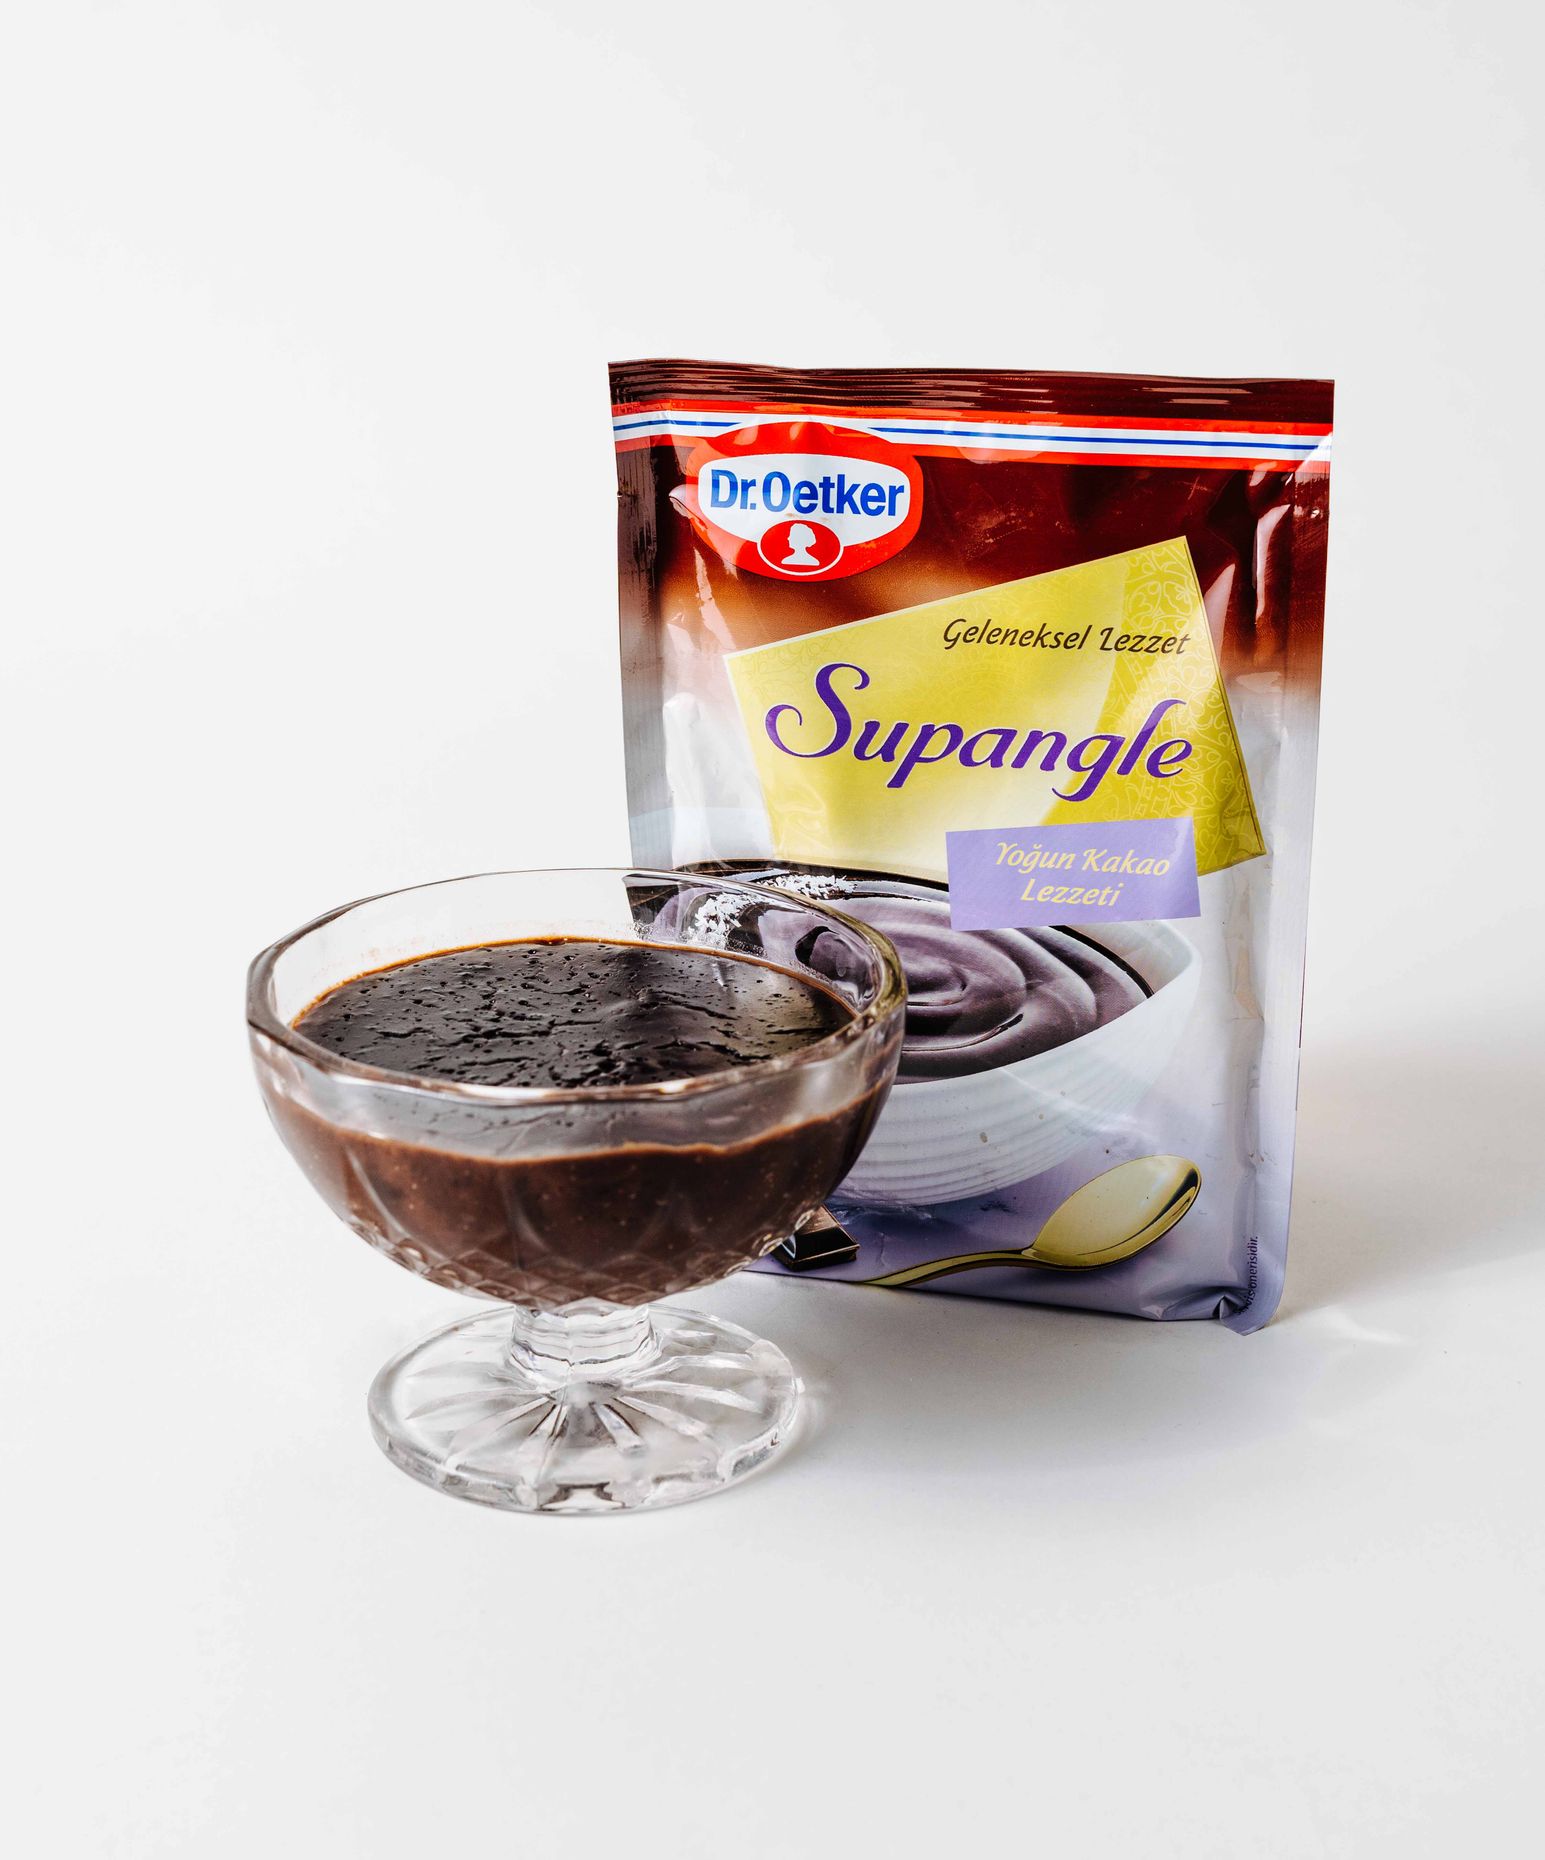 Dr. Oetker Chocolate Pudding Mix